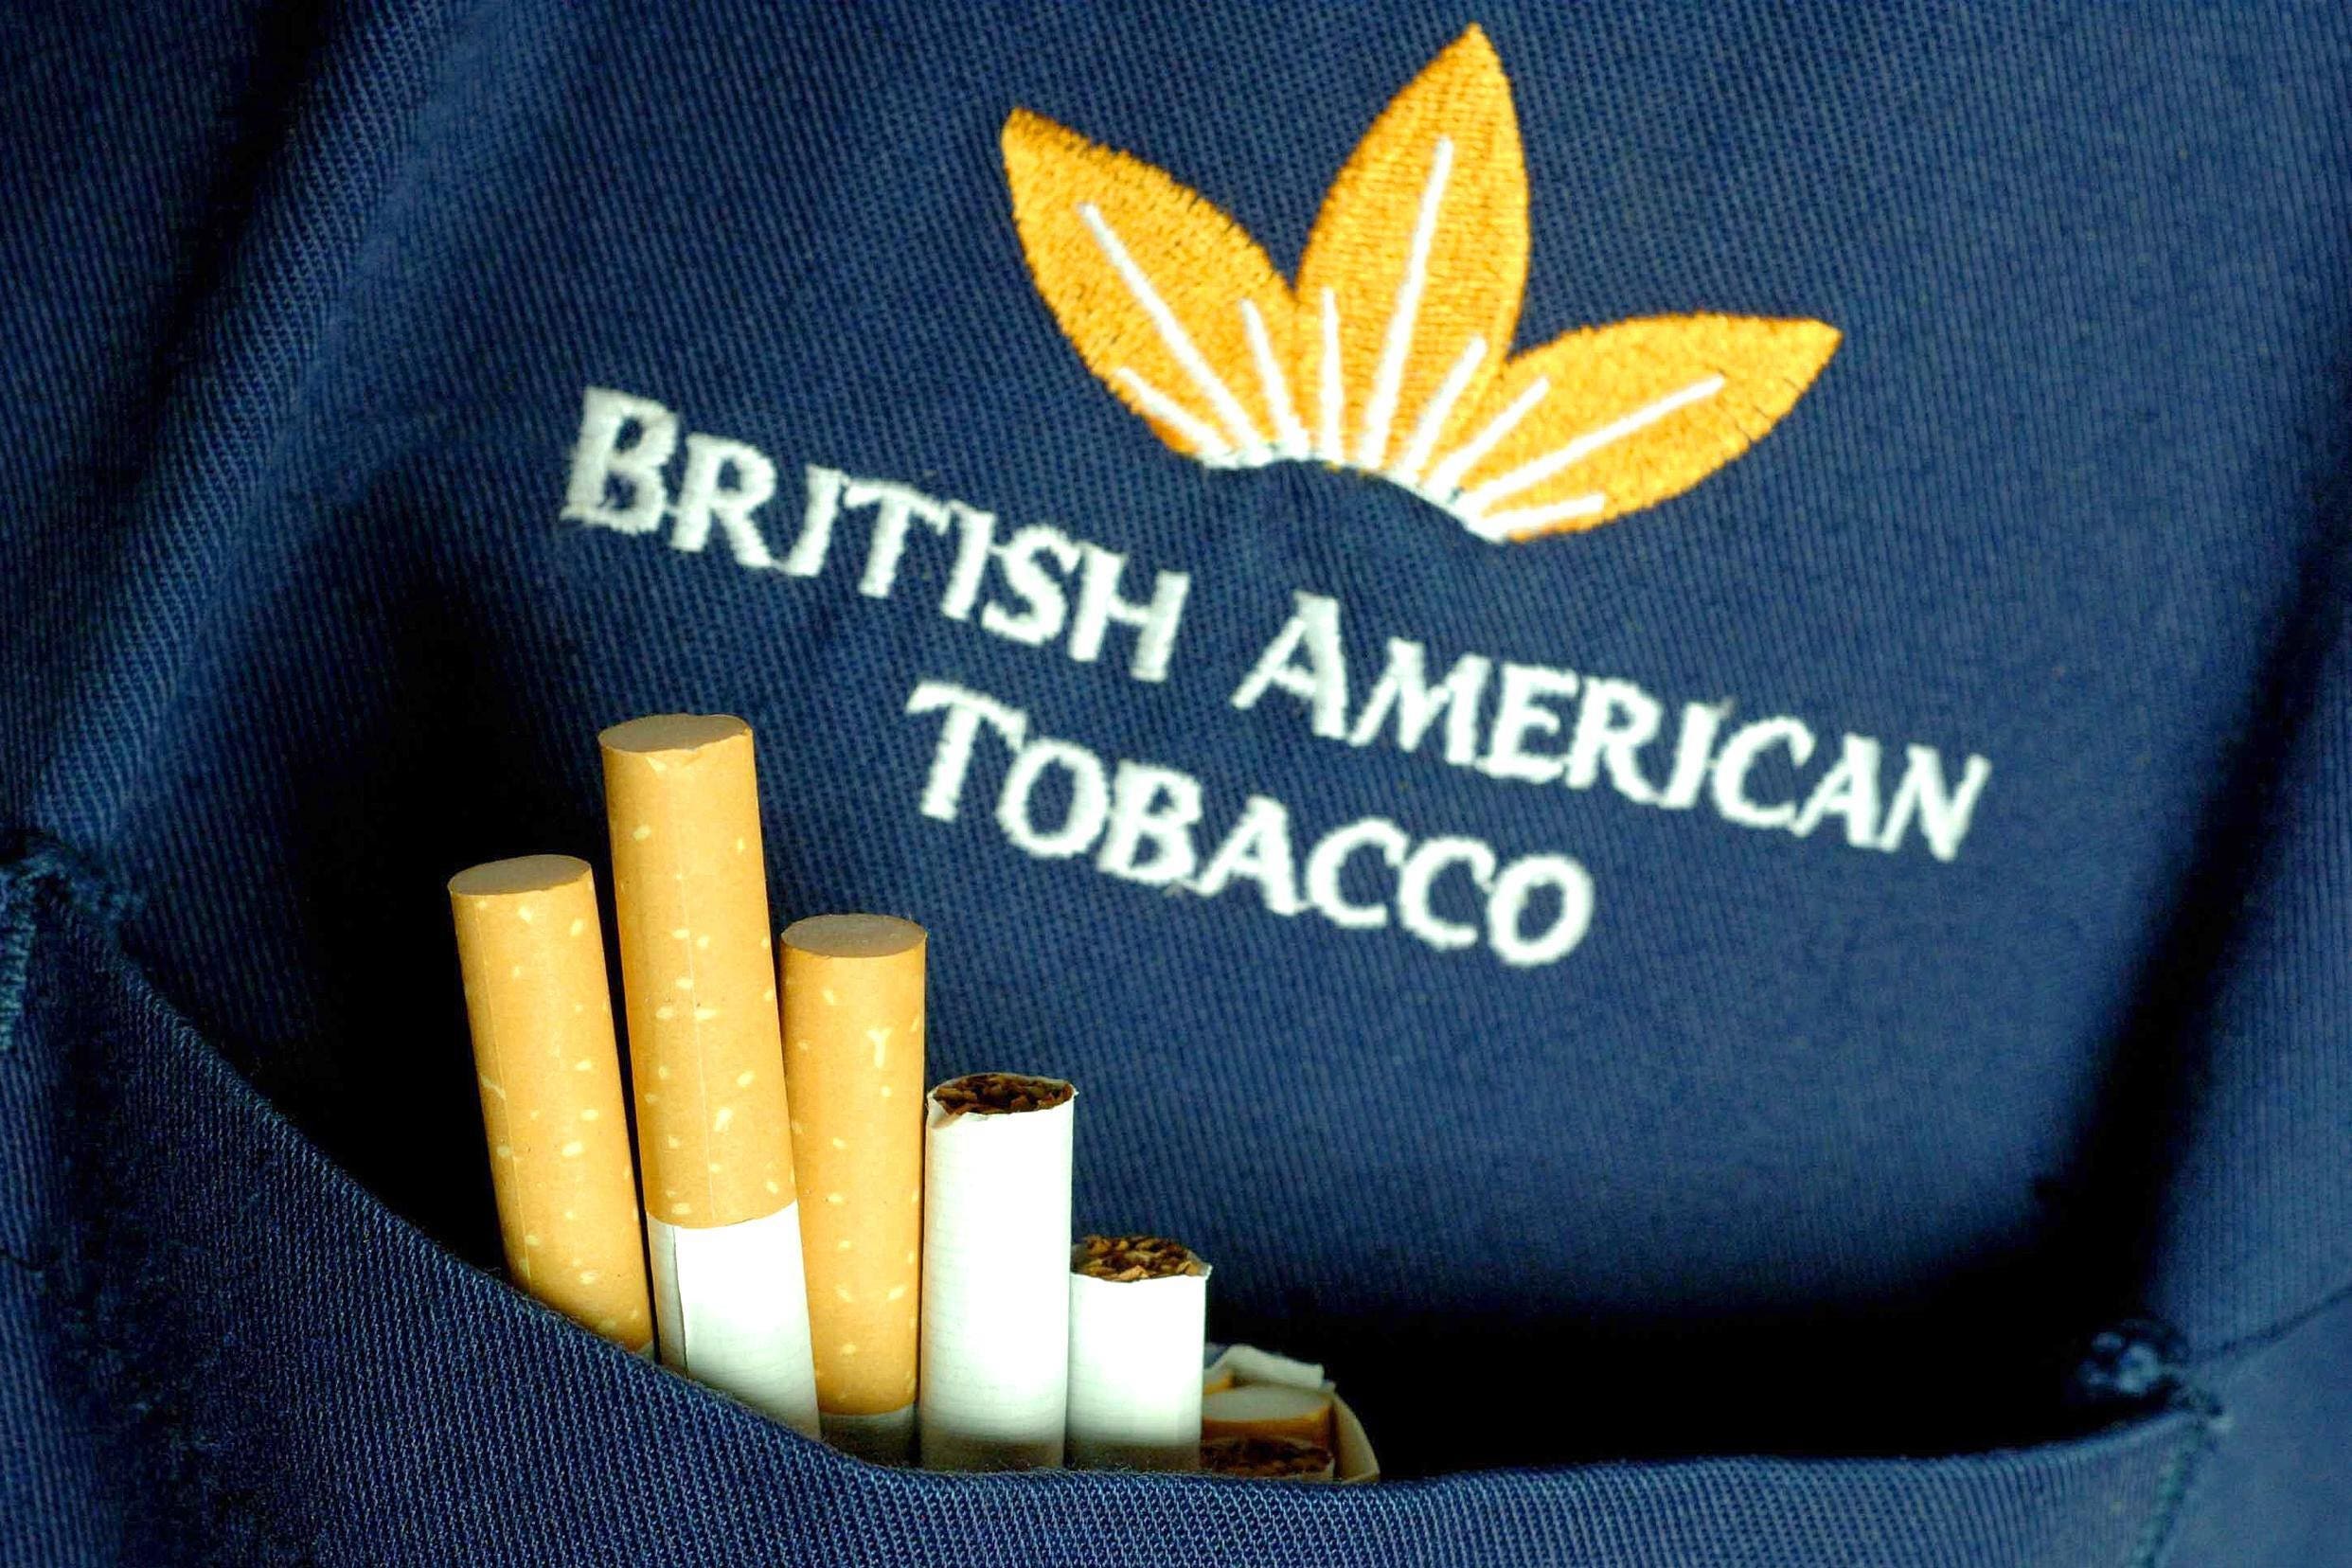 British American Tobacco has hailed gaining 900,000 customers using new products like vapes during the first quarter (Jason Alden/PA)